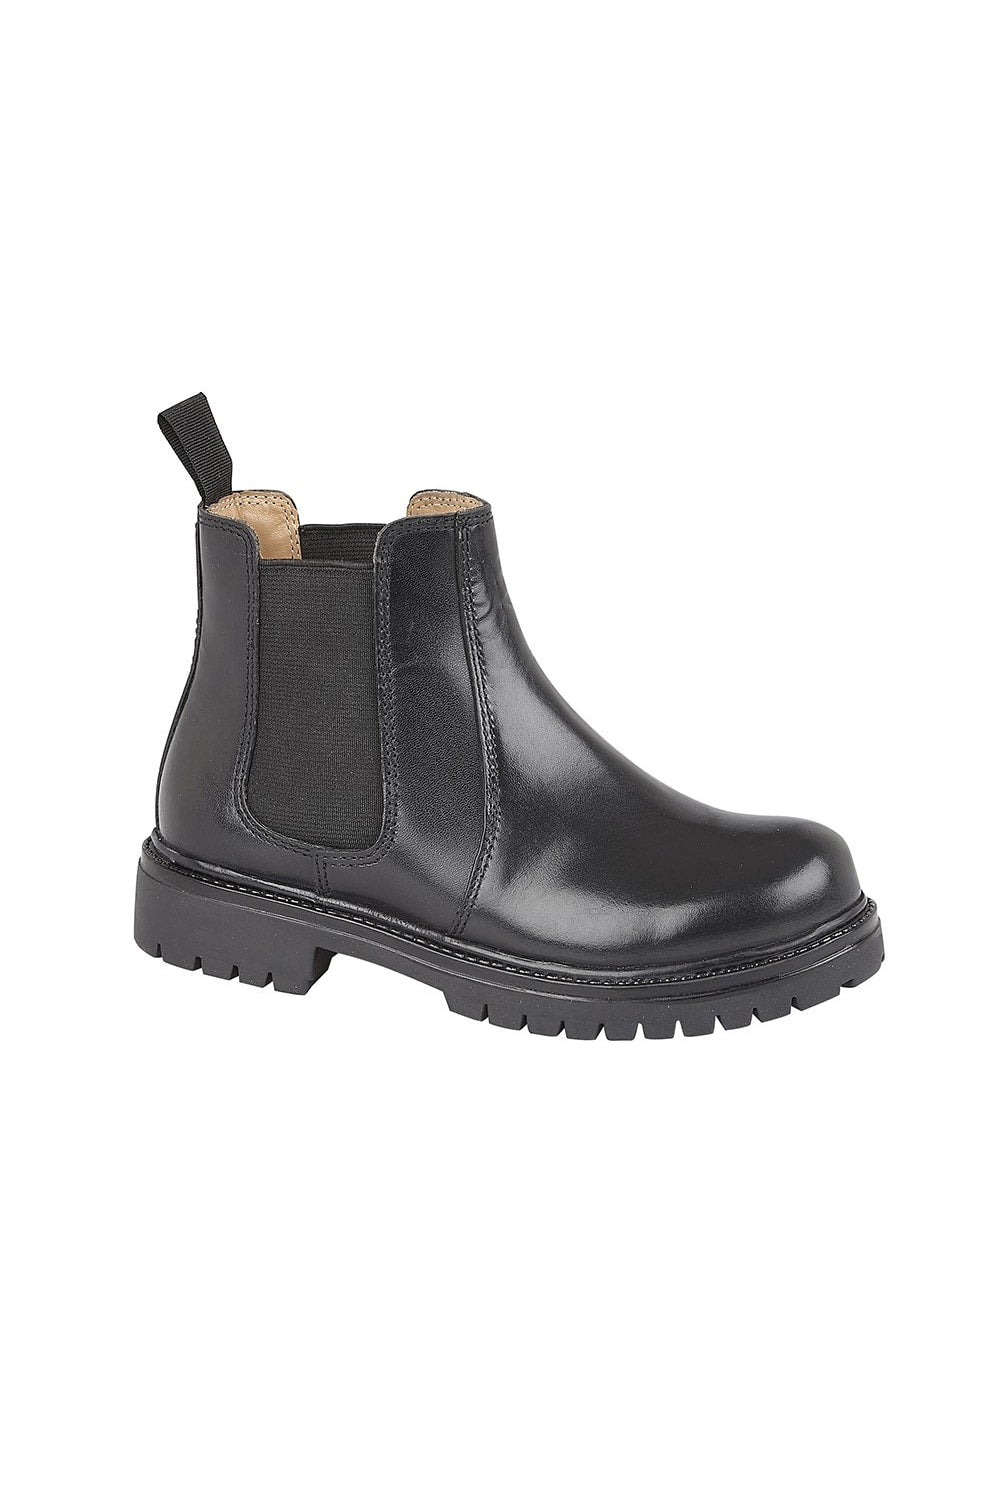 Roamers Boys Space Leather Ankle Boots